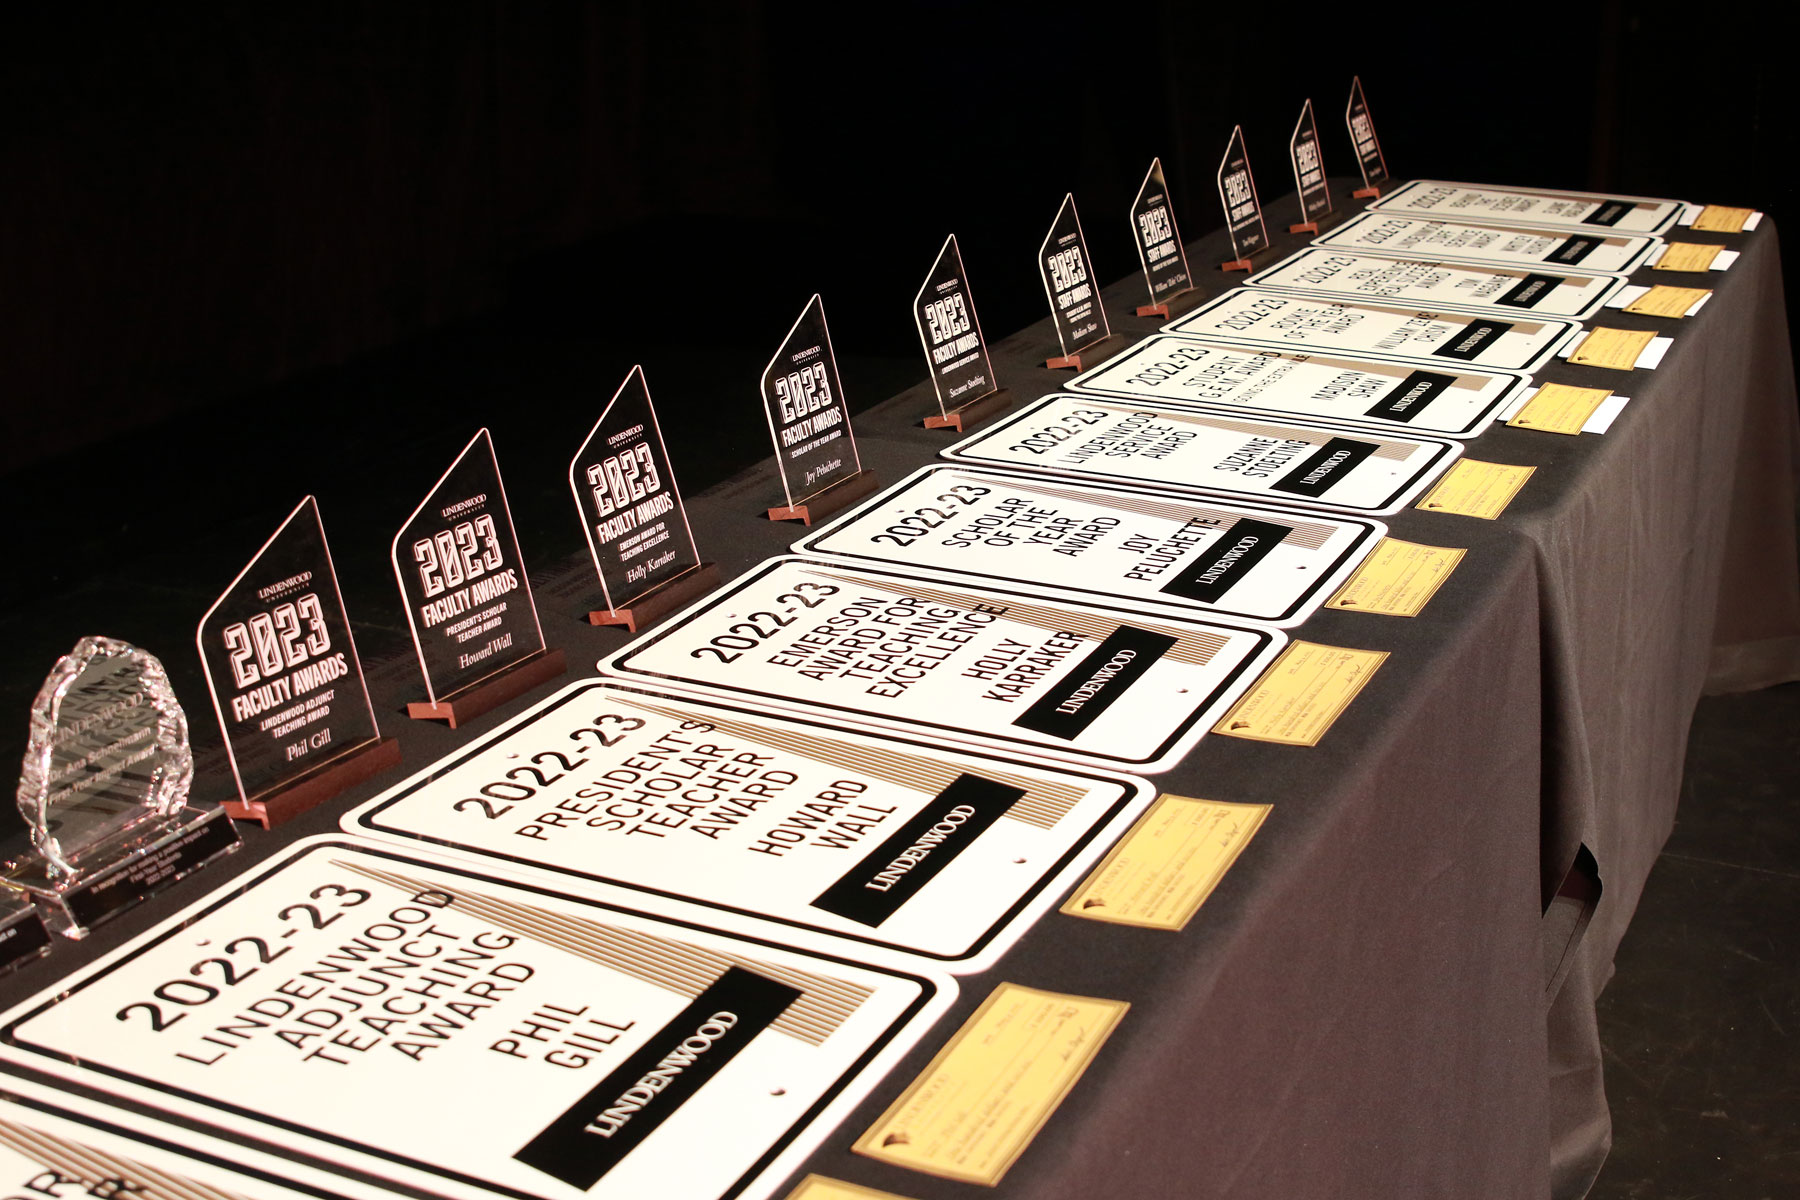 award winner signs and plaques